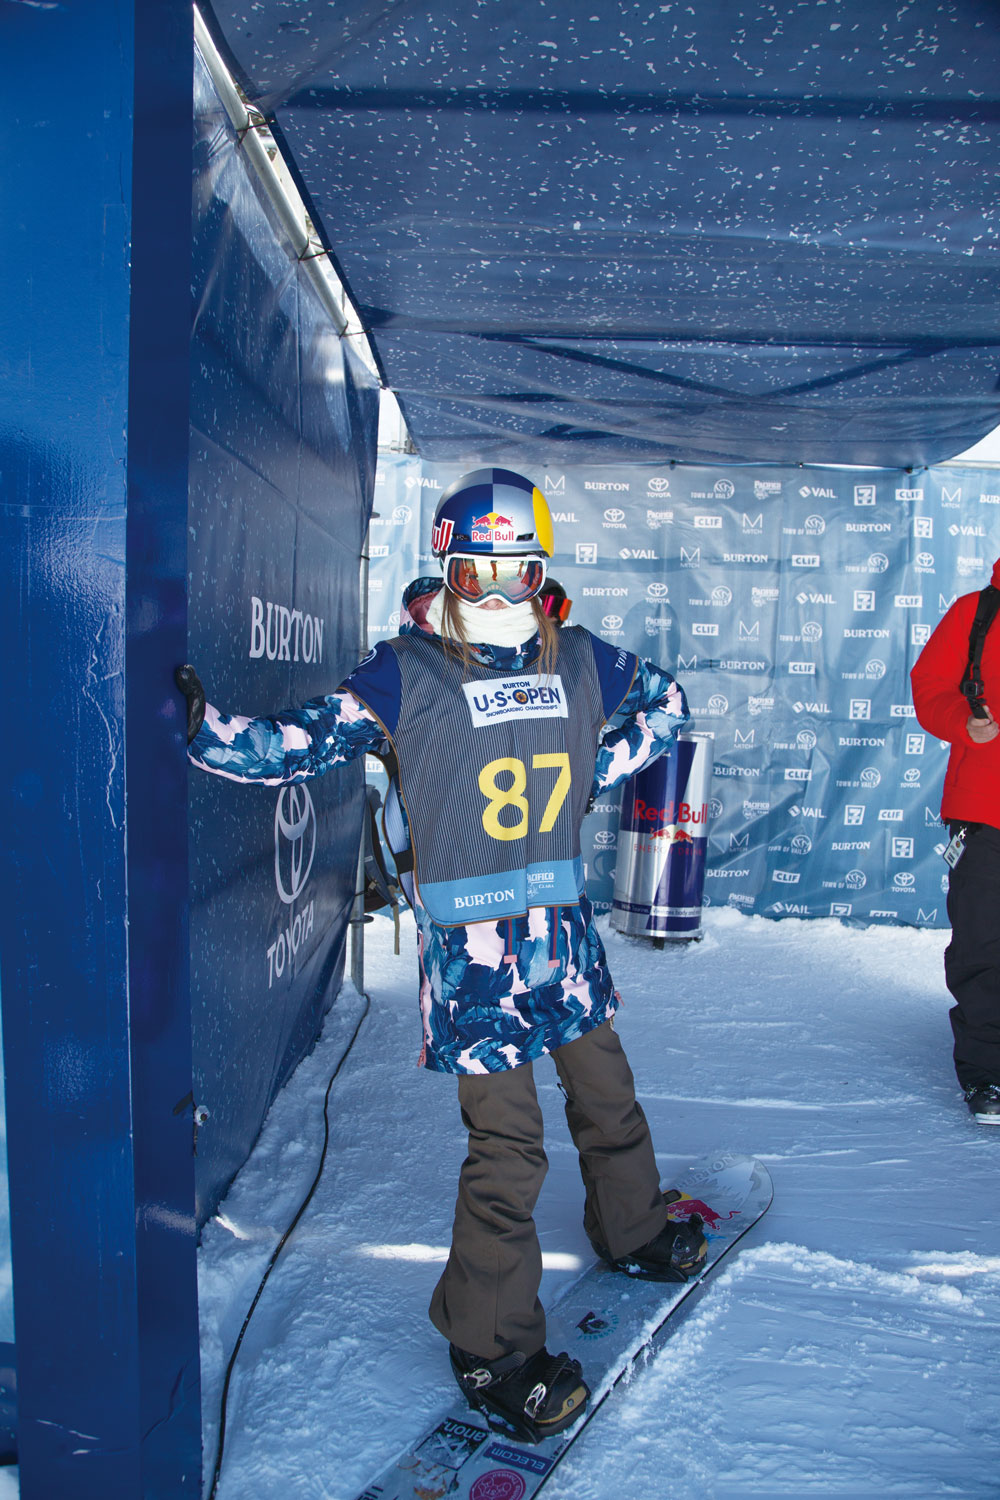 A scene from the US OPEN.The expression in the goggles is ... Photo: BURTON